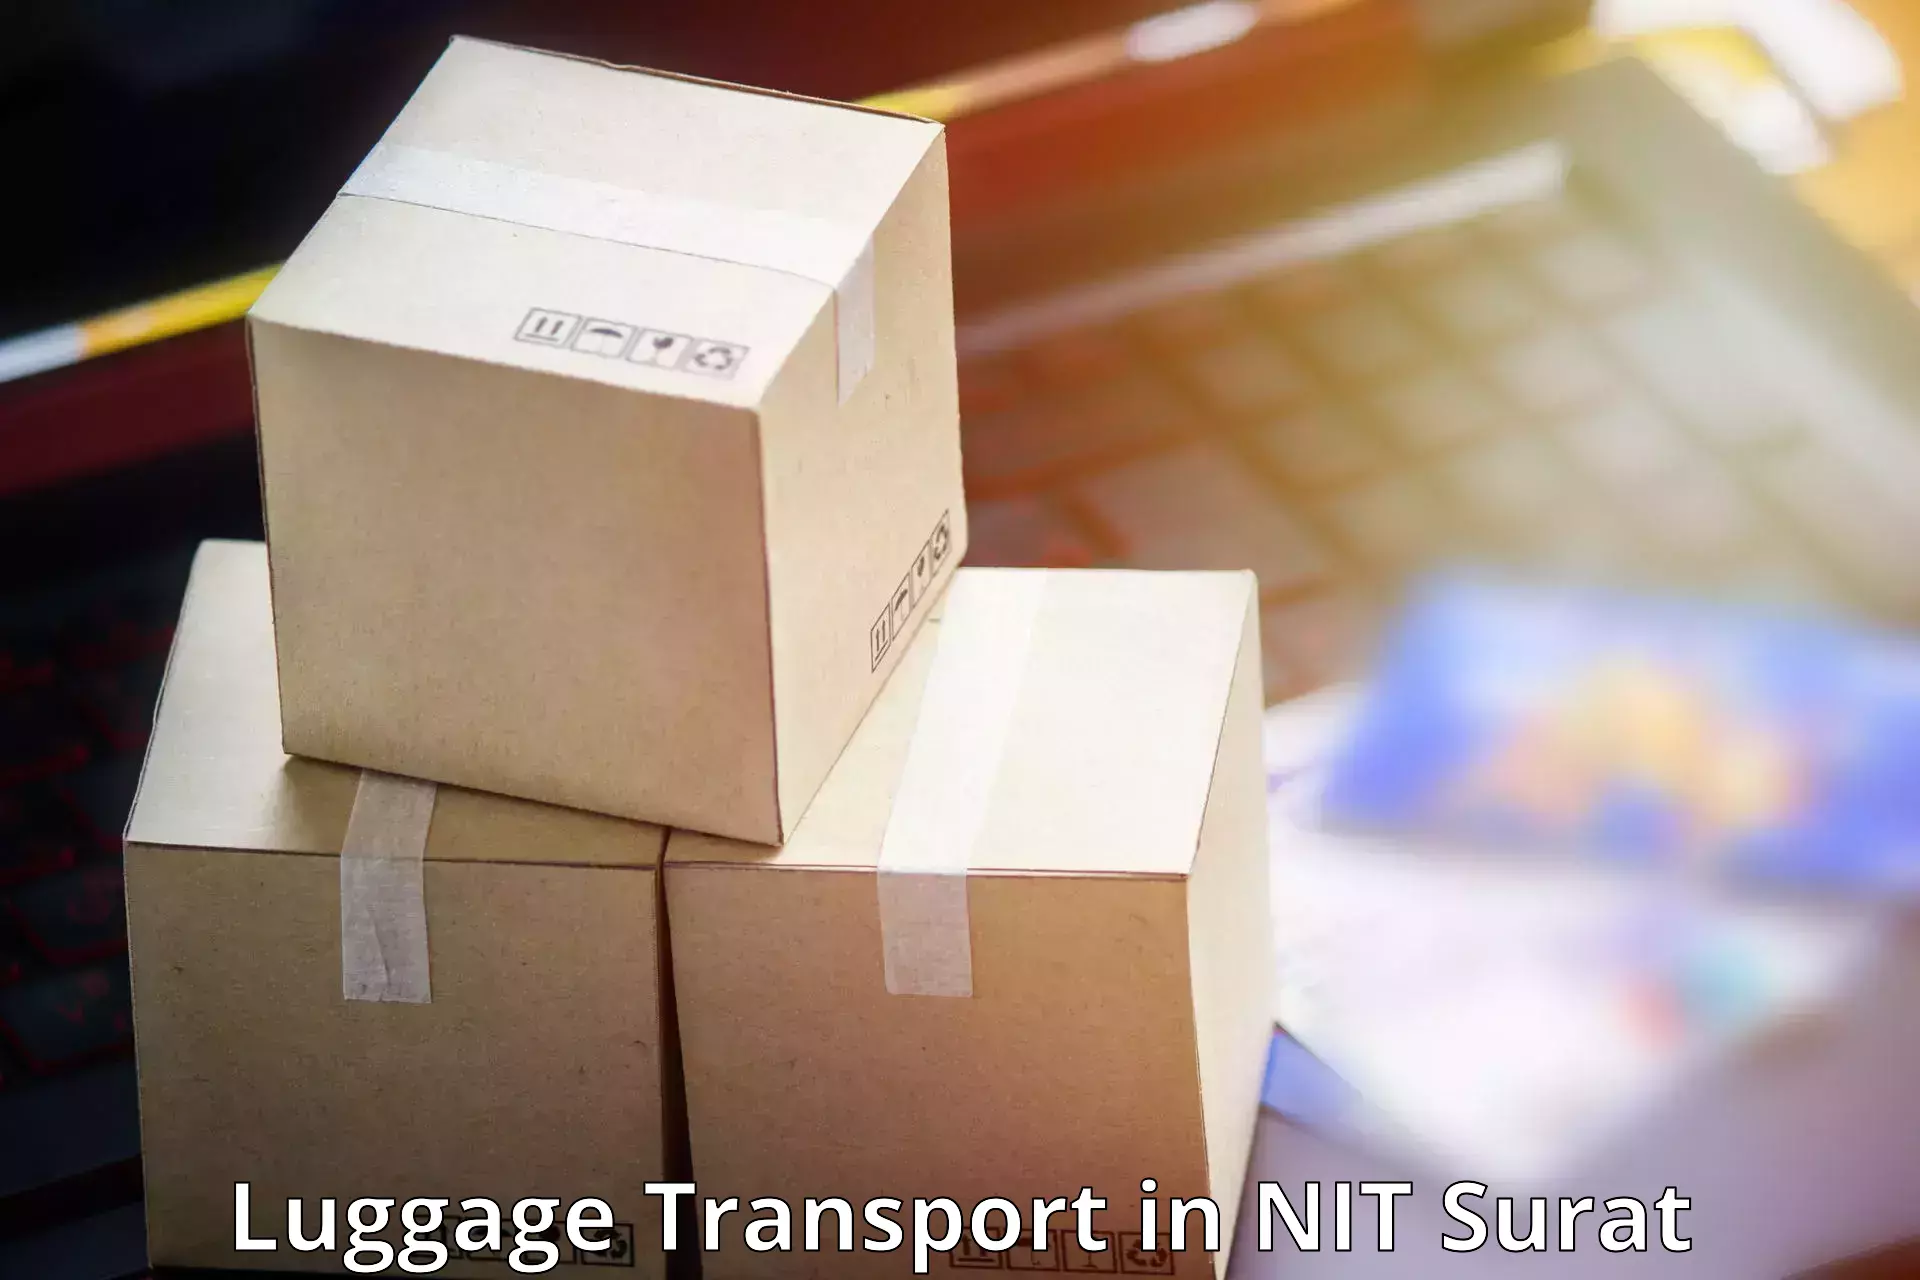 Luggage shipment tracking in NIT Surat